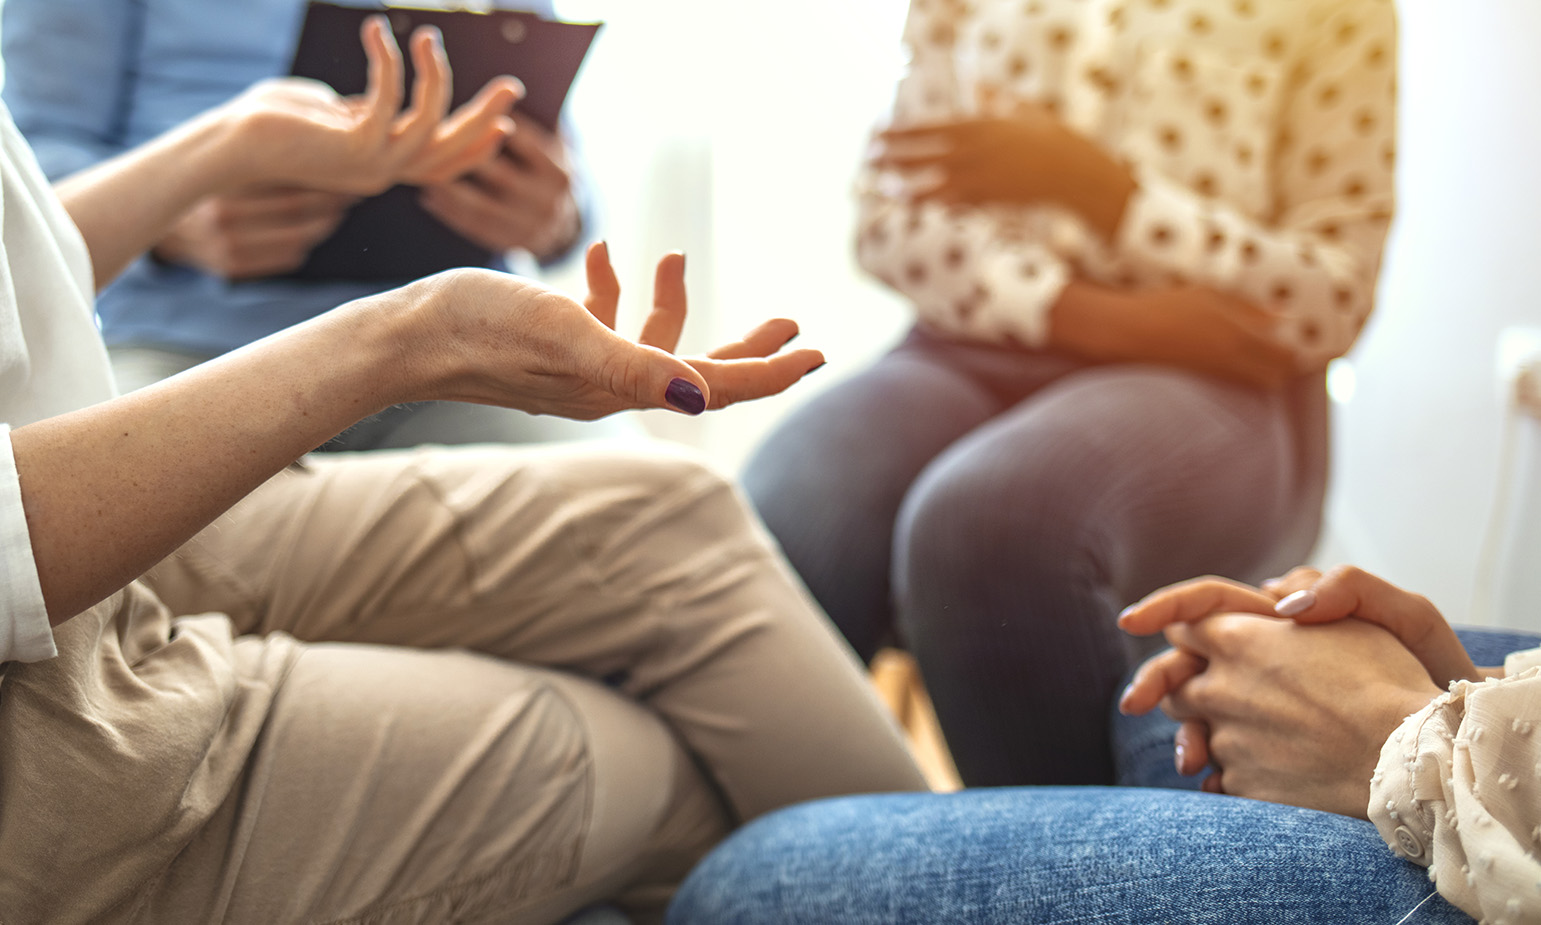 X First Time 18 Years Sex - Support Groups: Types, Benefits, and What to Expect - HelpGuide.org